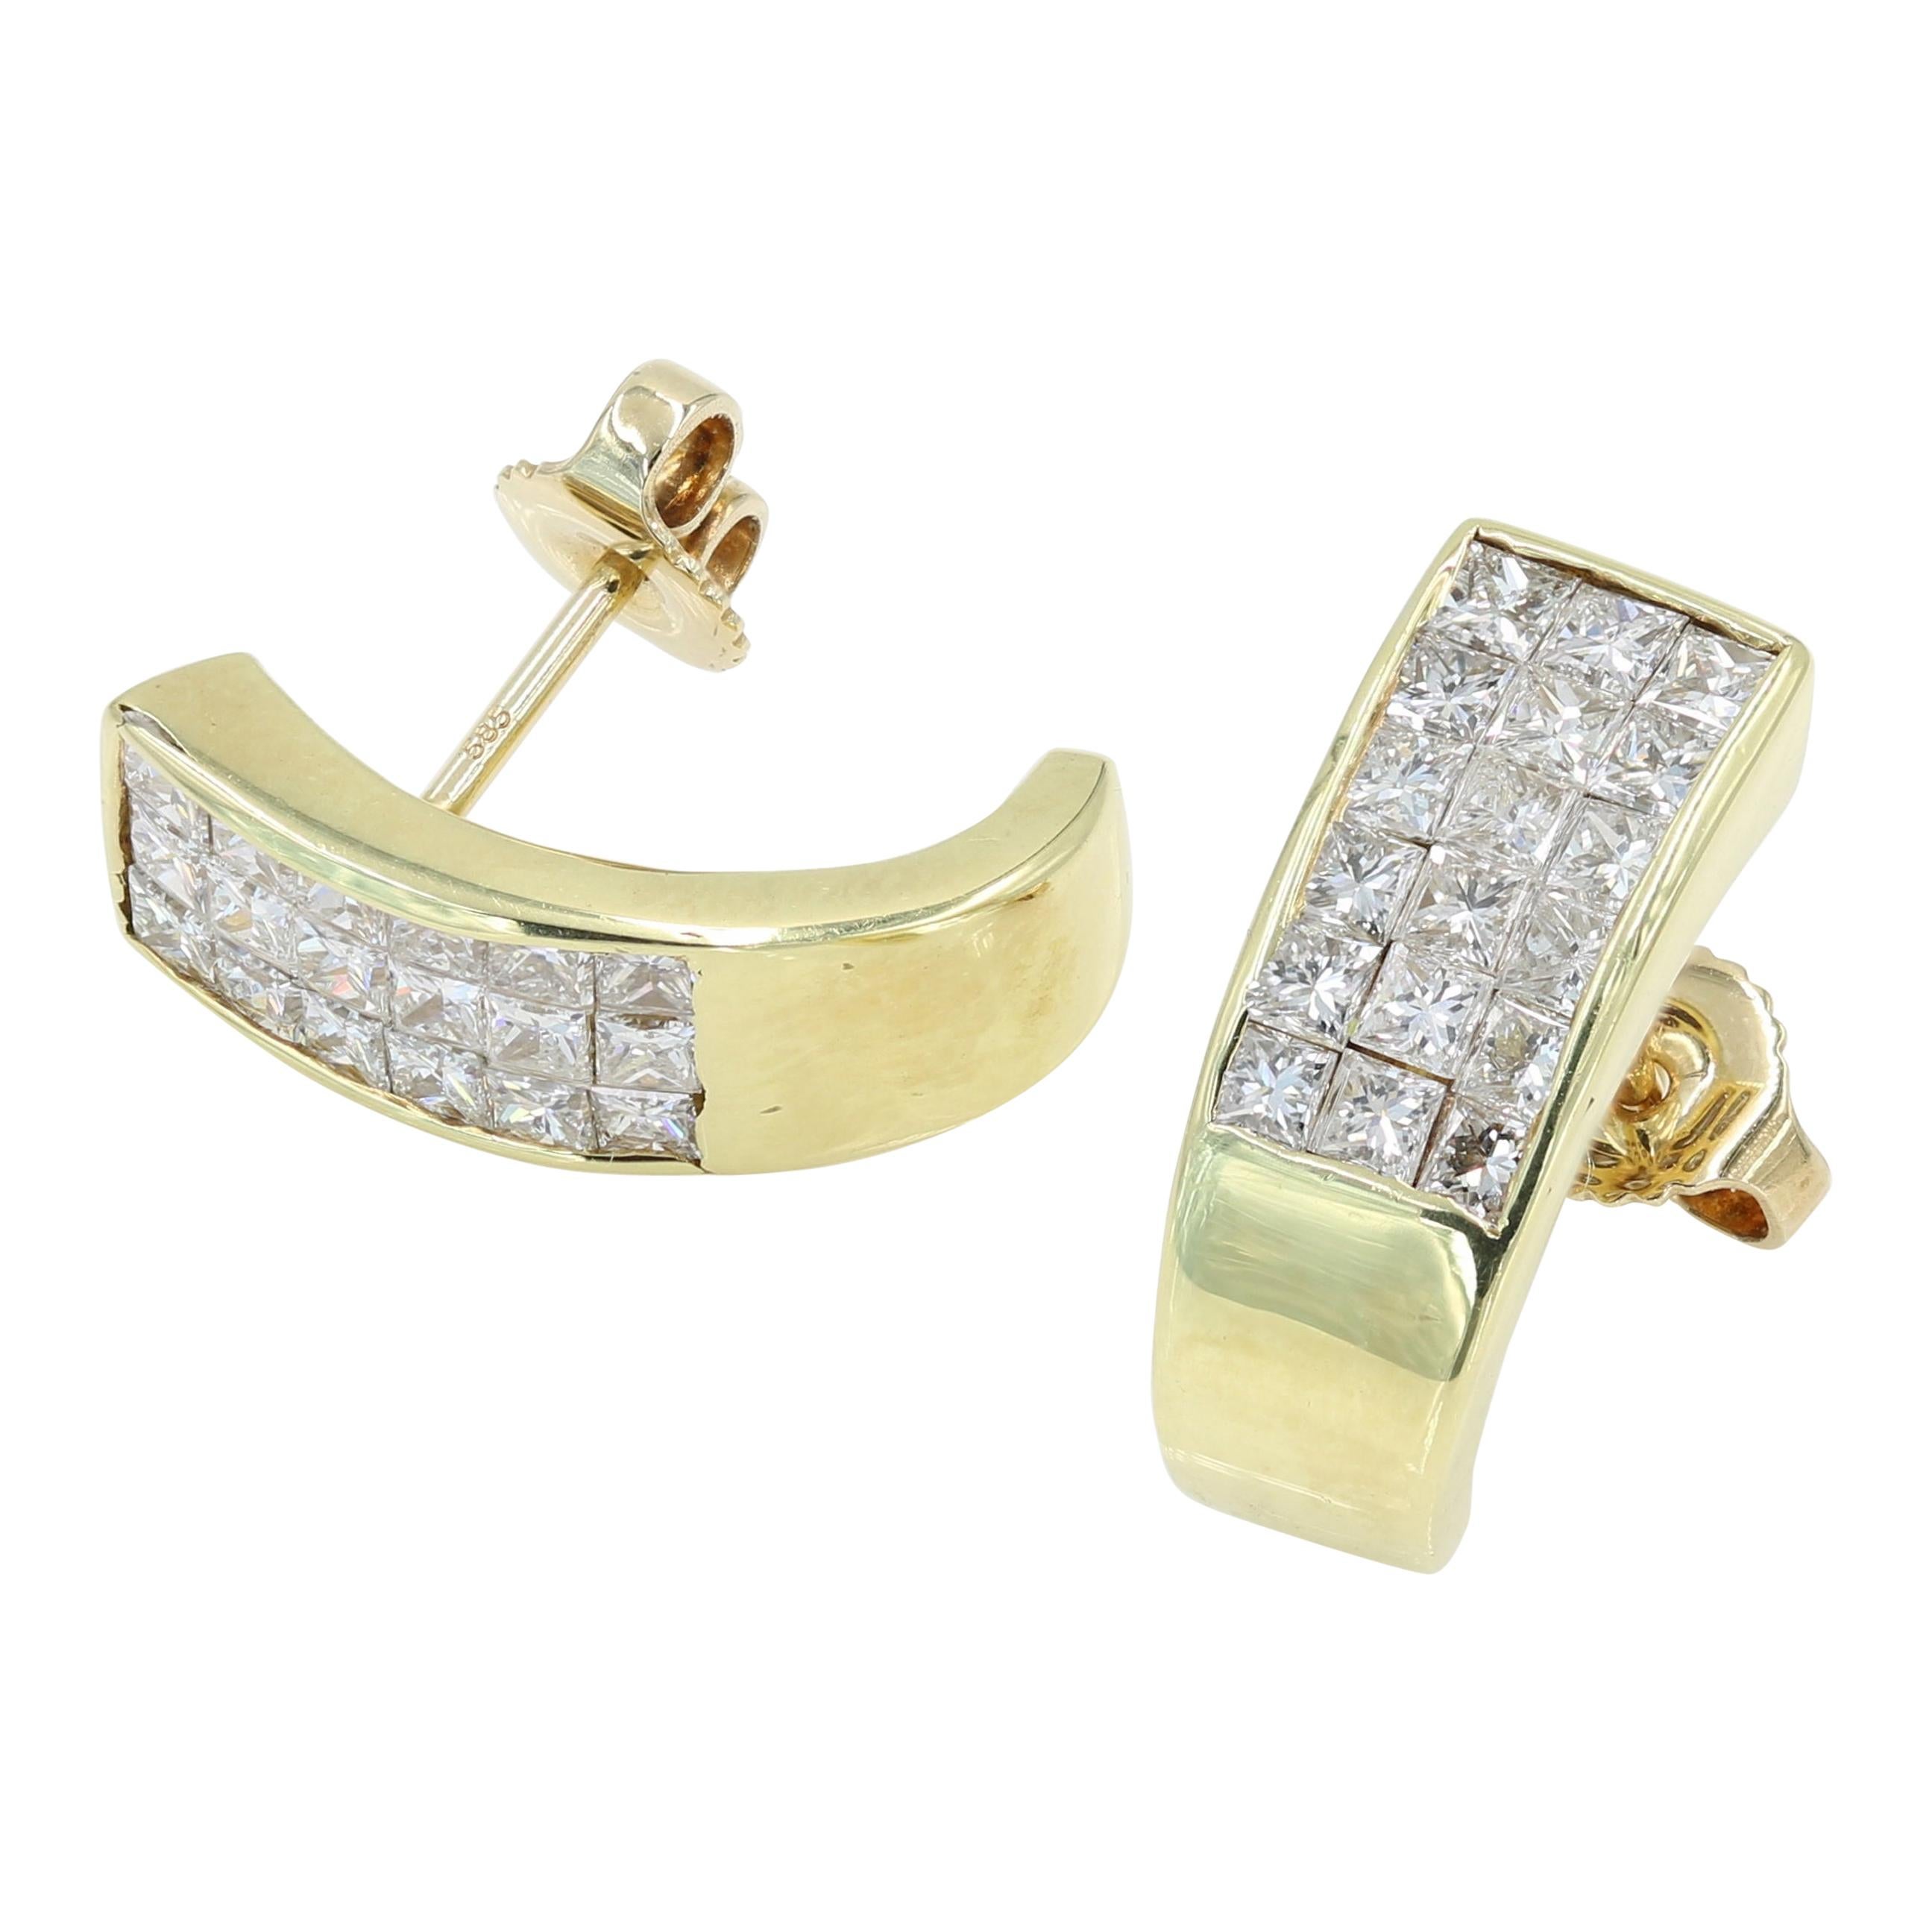 Invisible Set Princess Cut Diamond Earrings in 18 Karat Yellow Gold For Sale